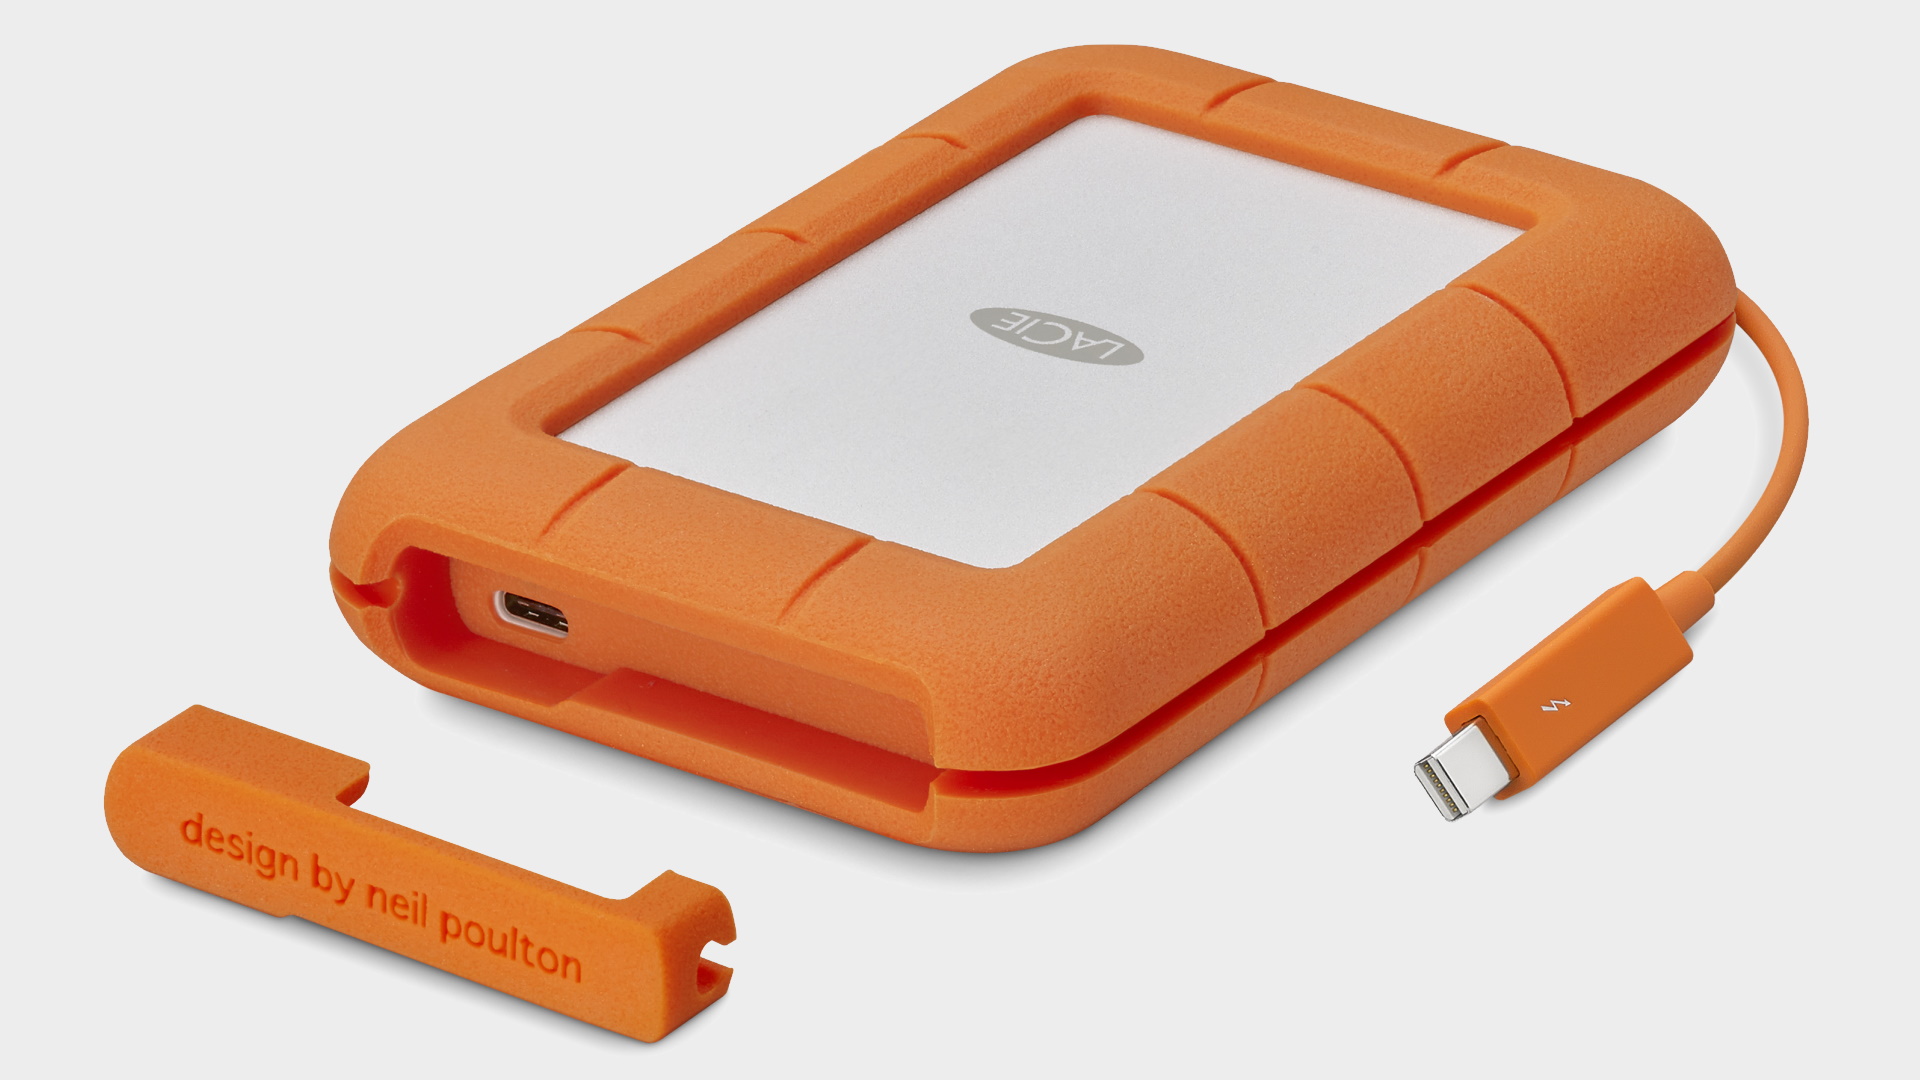 LaCie Rugged Thunderbolt external hard drive on a grey background with cable.